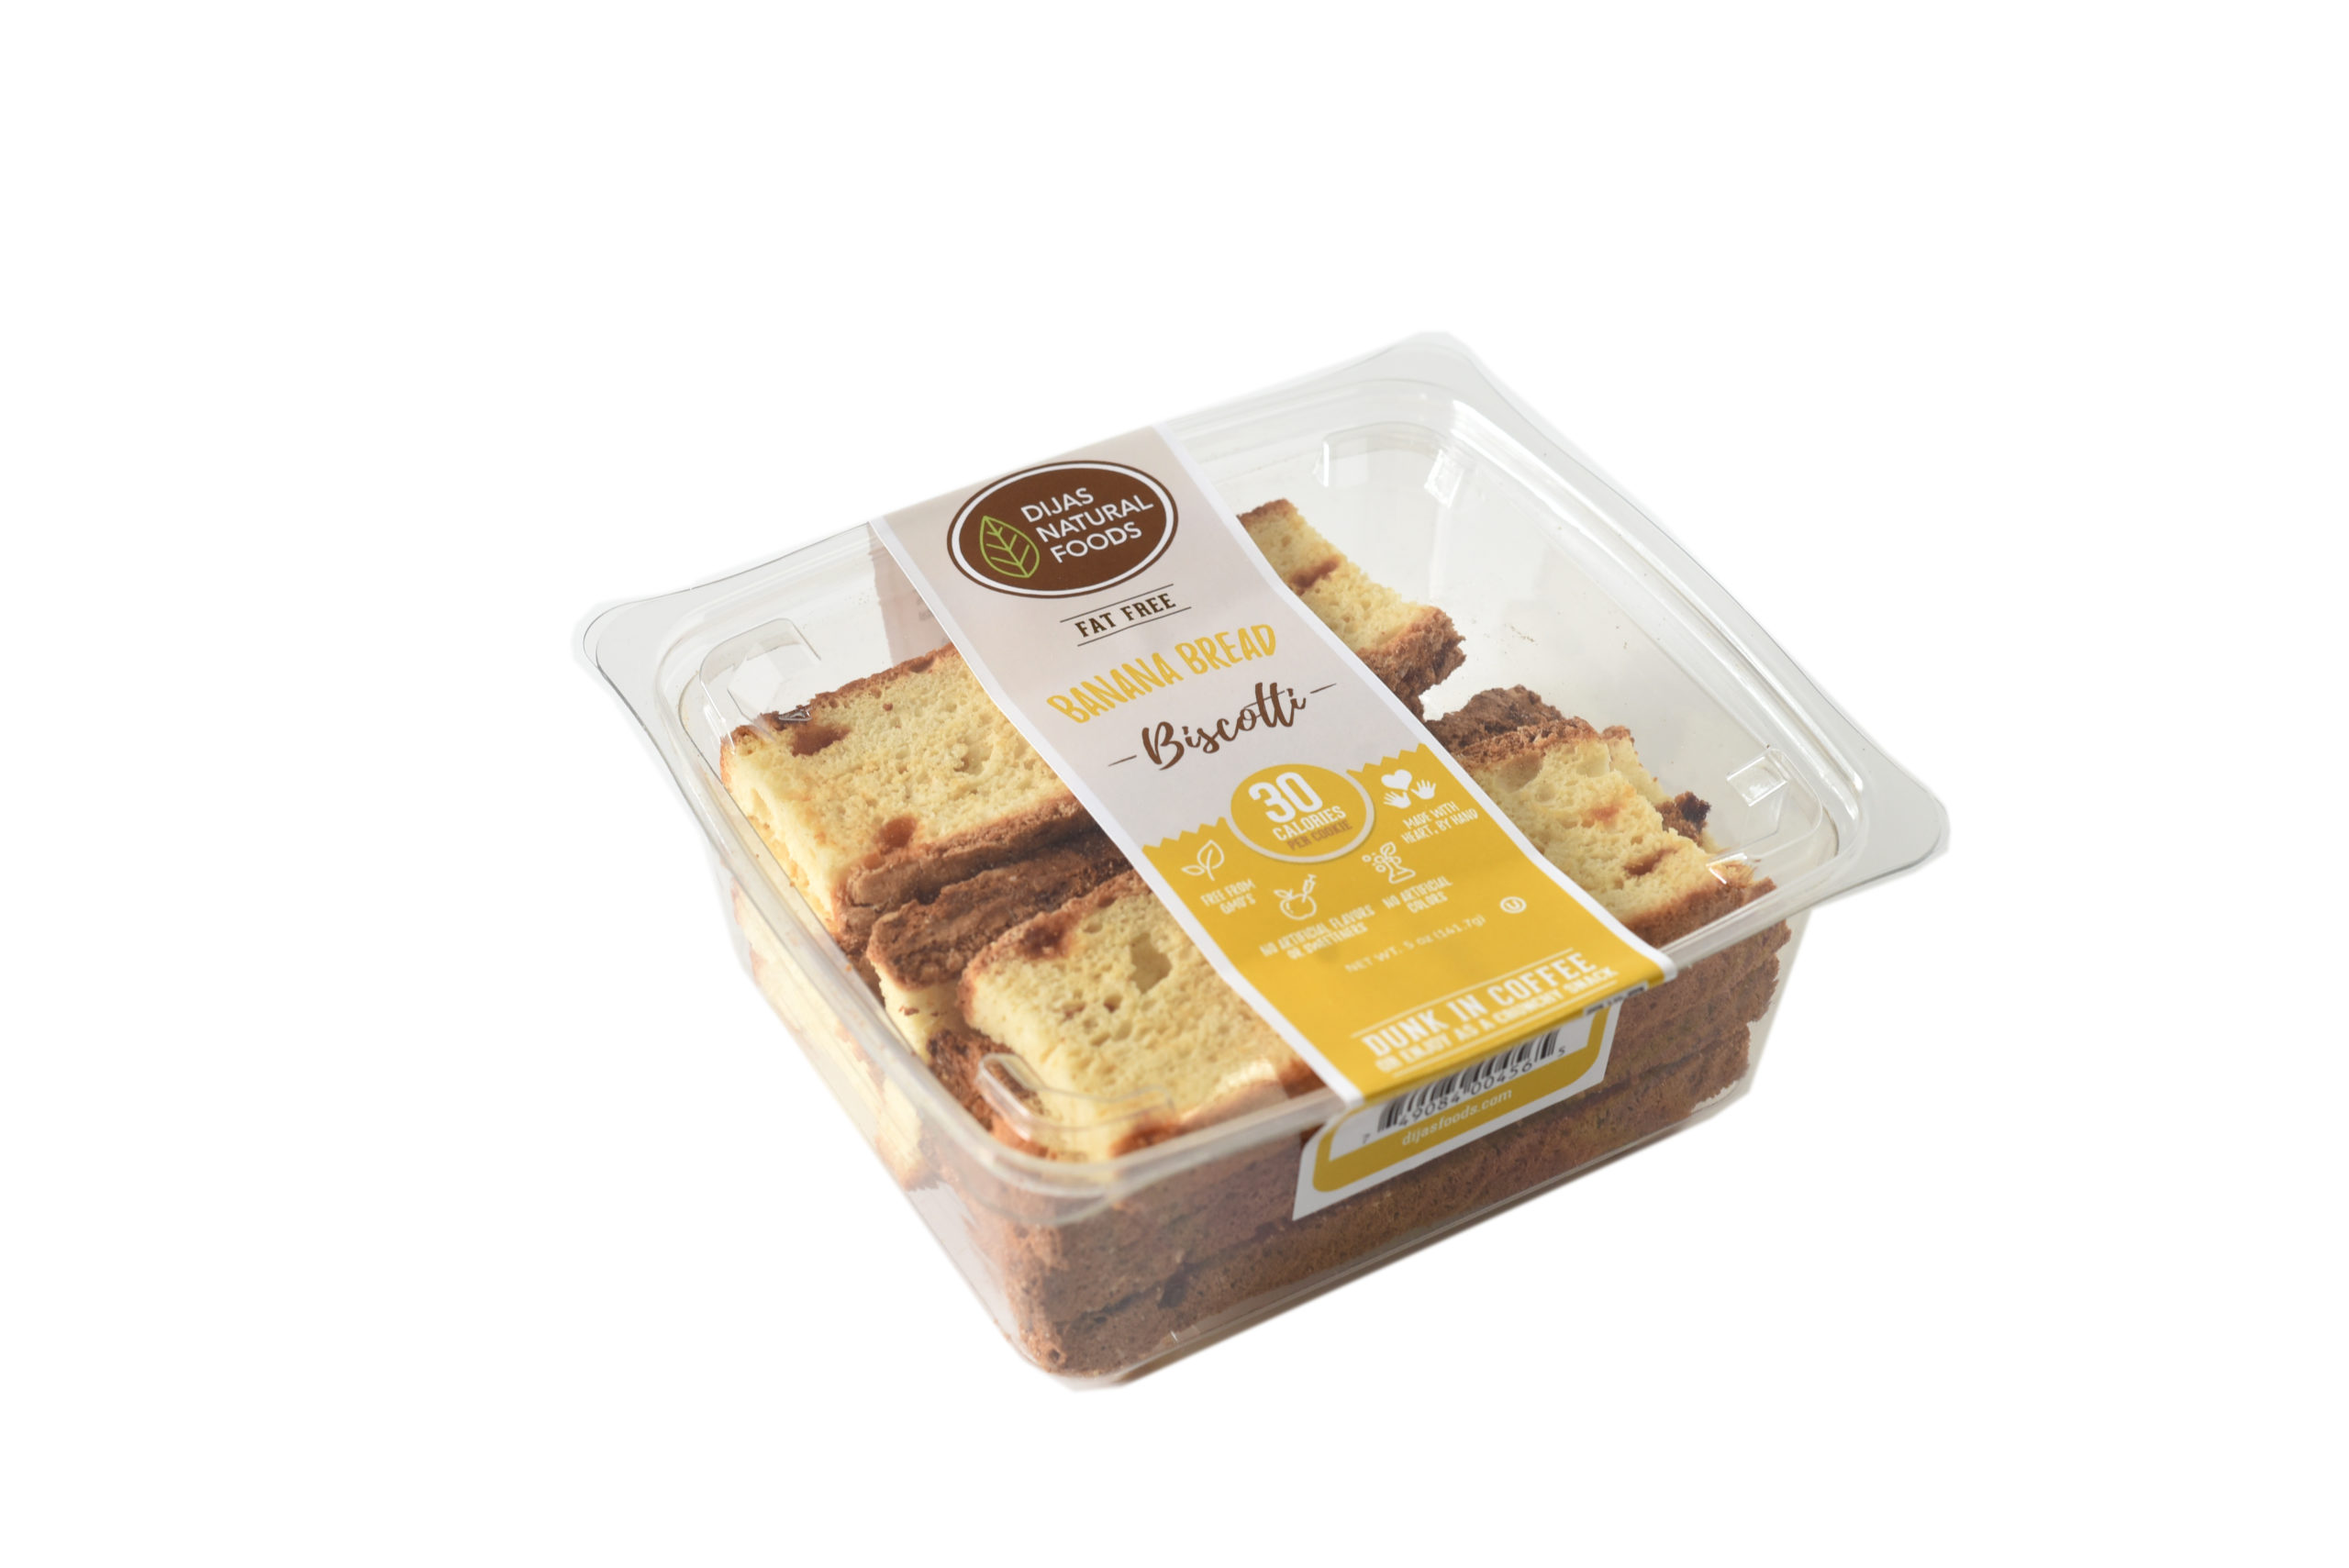 DIJAS Banana Biscotti is a delicious, low-calorie, fat-free, healthy snack. We ship to all 48 continental states in the USA including Florida, California, Texas, Colorado, New Jersey, Delaware, New York, and Pennsylvania!